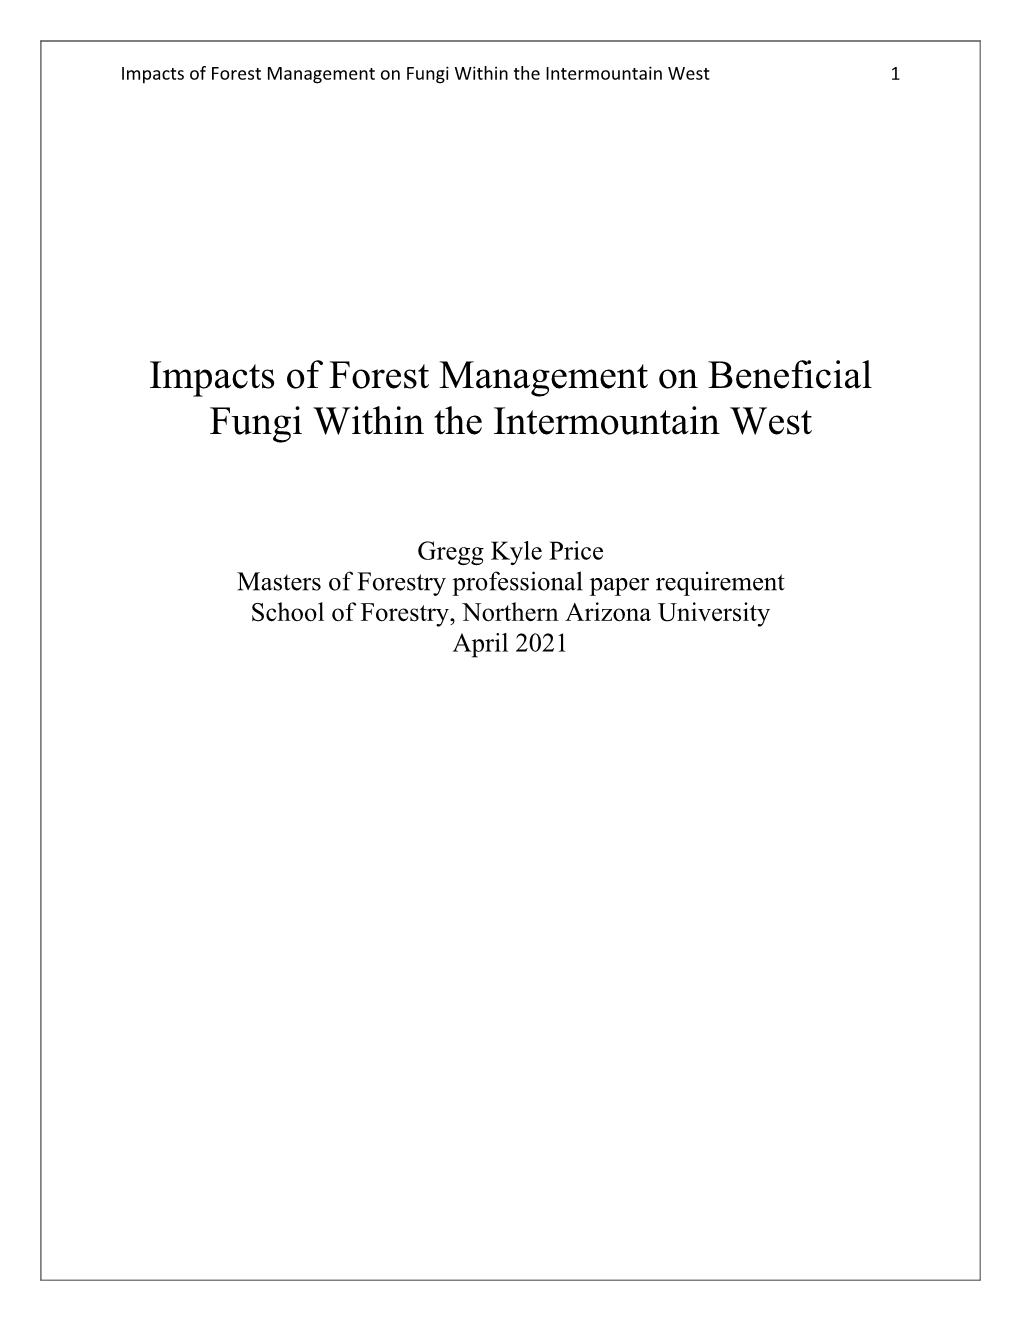 Impacts of Forest Management on Beneficial Fungi Within the Intermountain West